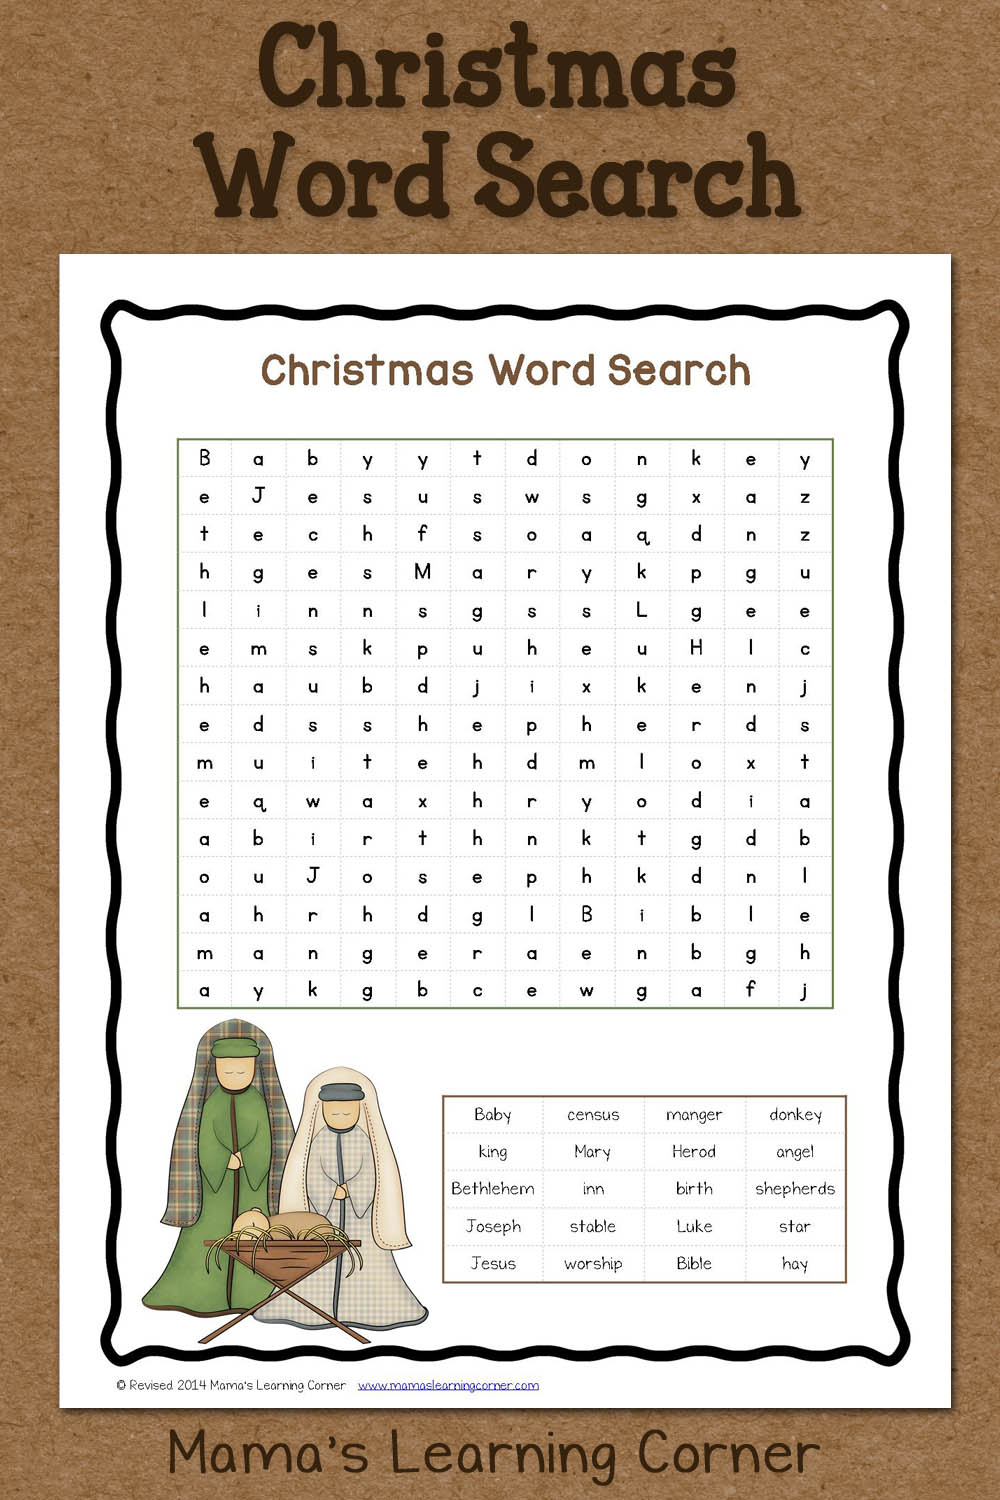 Christmas Word Search: Free Printable - Mamas Learning Corner - Christian Word Search Puzzles Free Printable